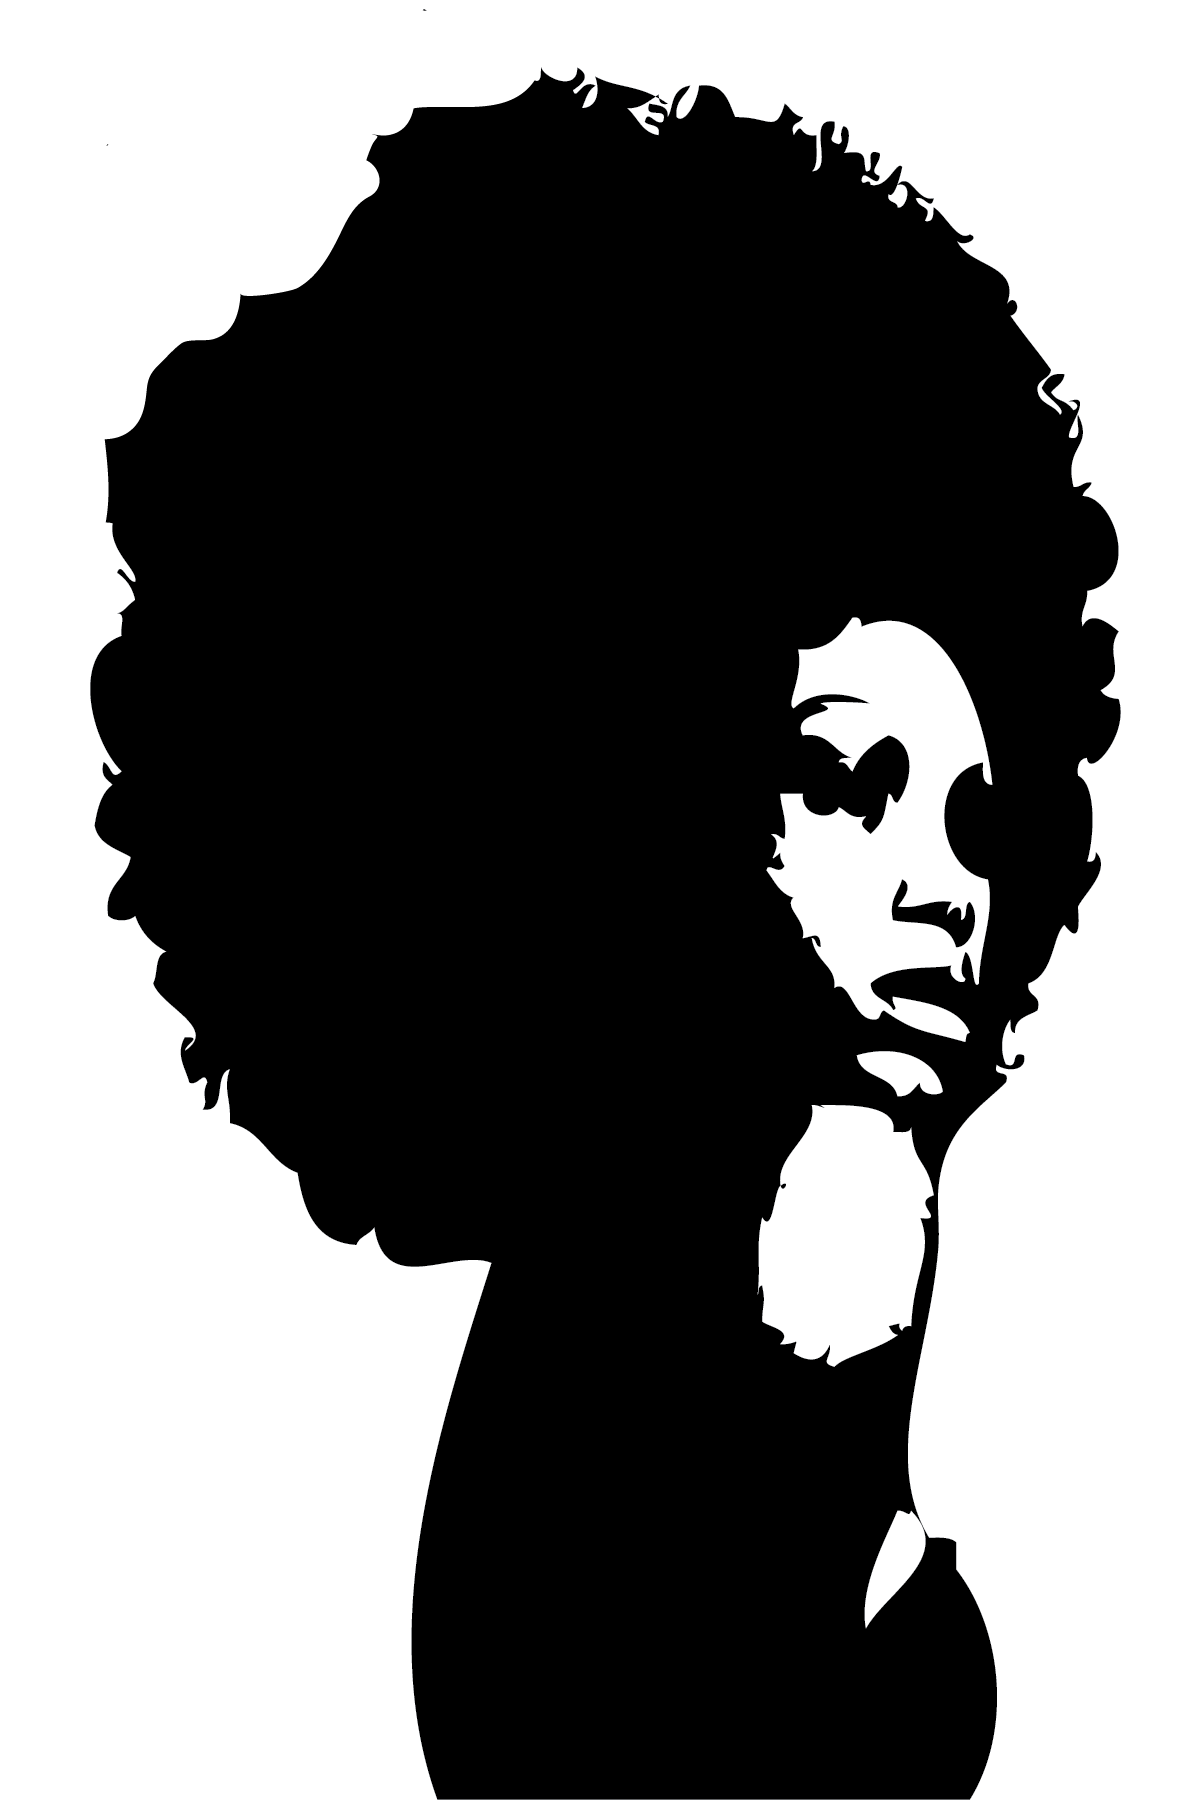 Black Woman Afro Silhouette Images  Pictures - Becuo